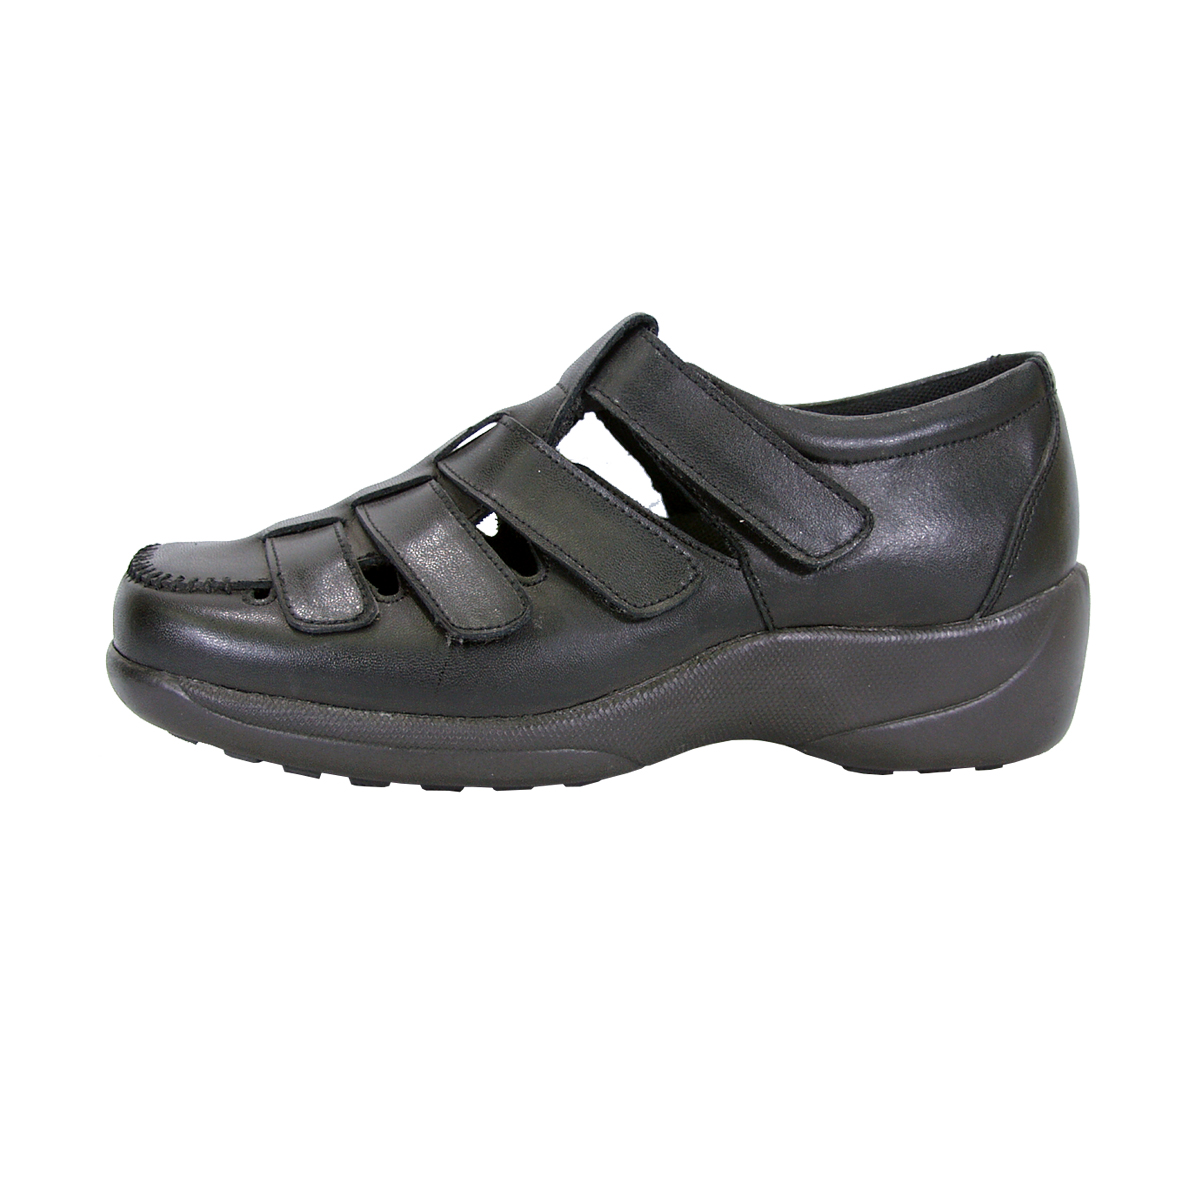 24 HOUR COMFORT Audrey Wide Width Comfort Shoes For Work and Casual Attire BLACK 6 - image 3 of 6